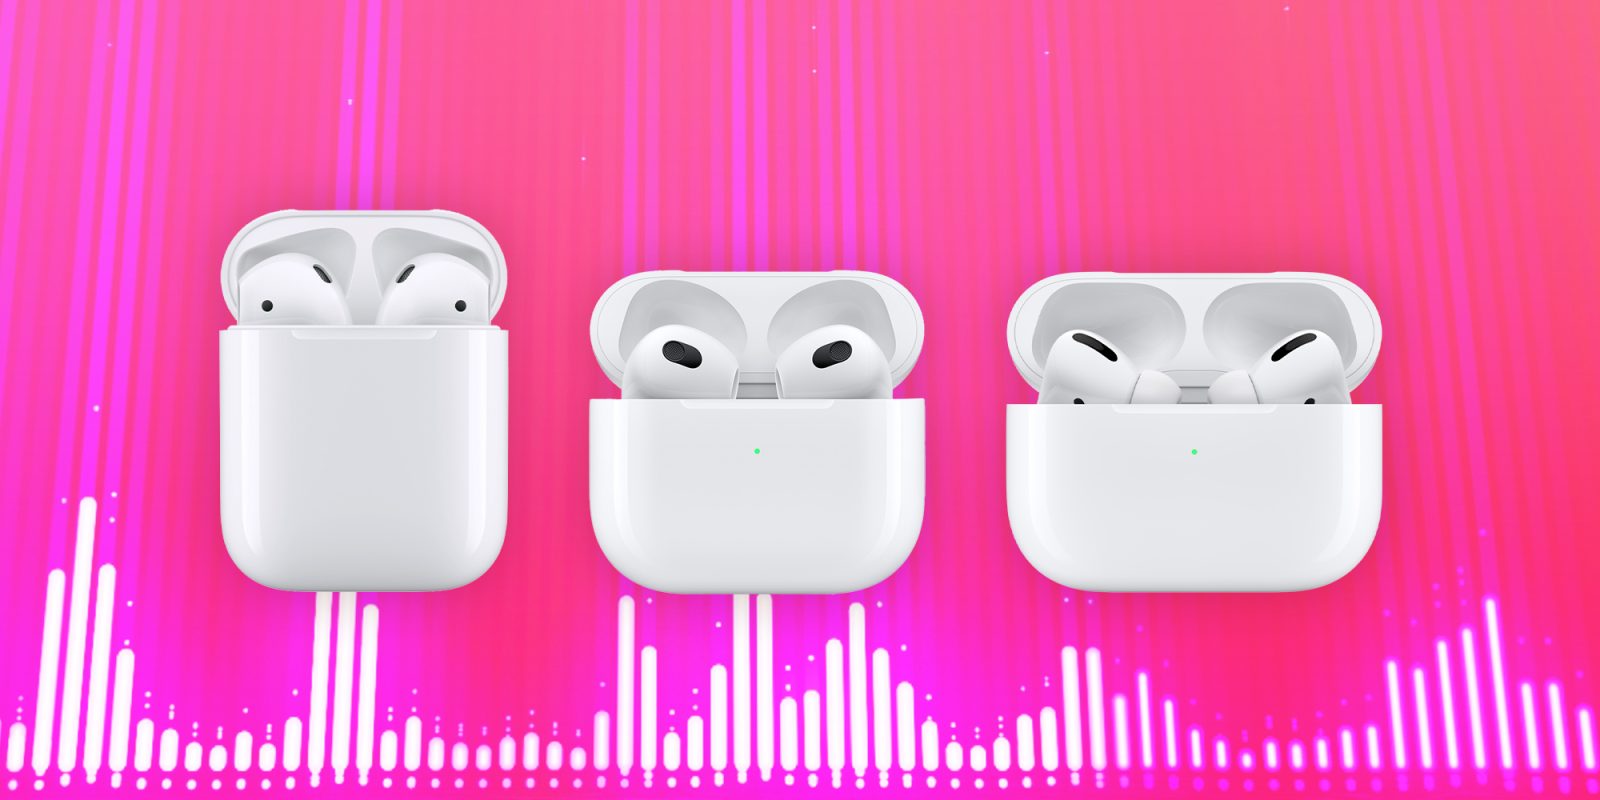 AirPods AirPods Pro: wireless headphones should buy in 2022? - 9to5Mac